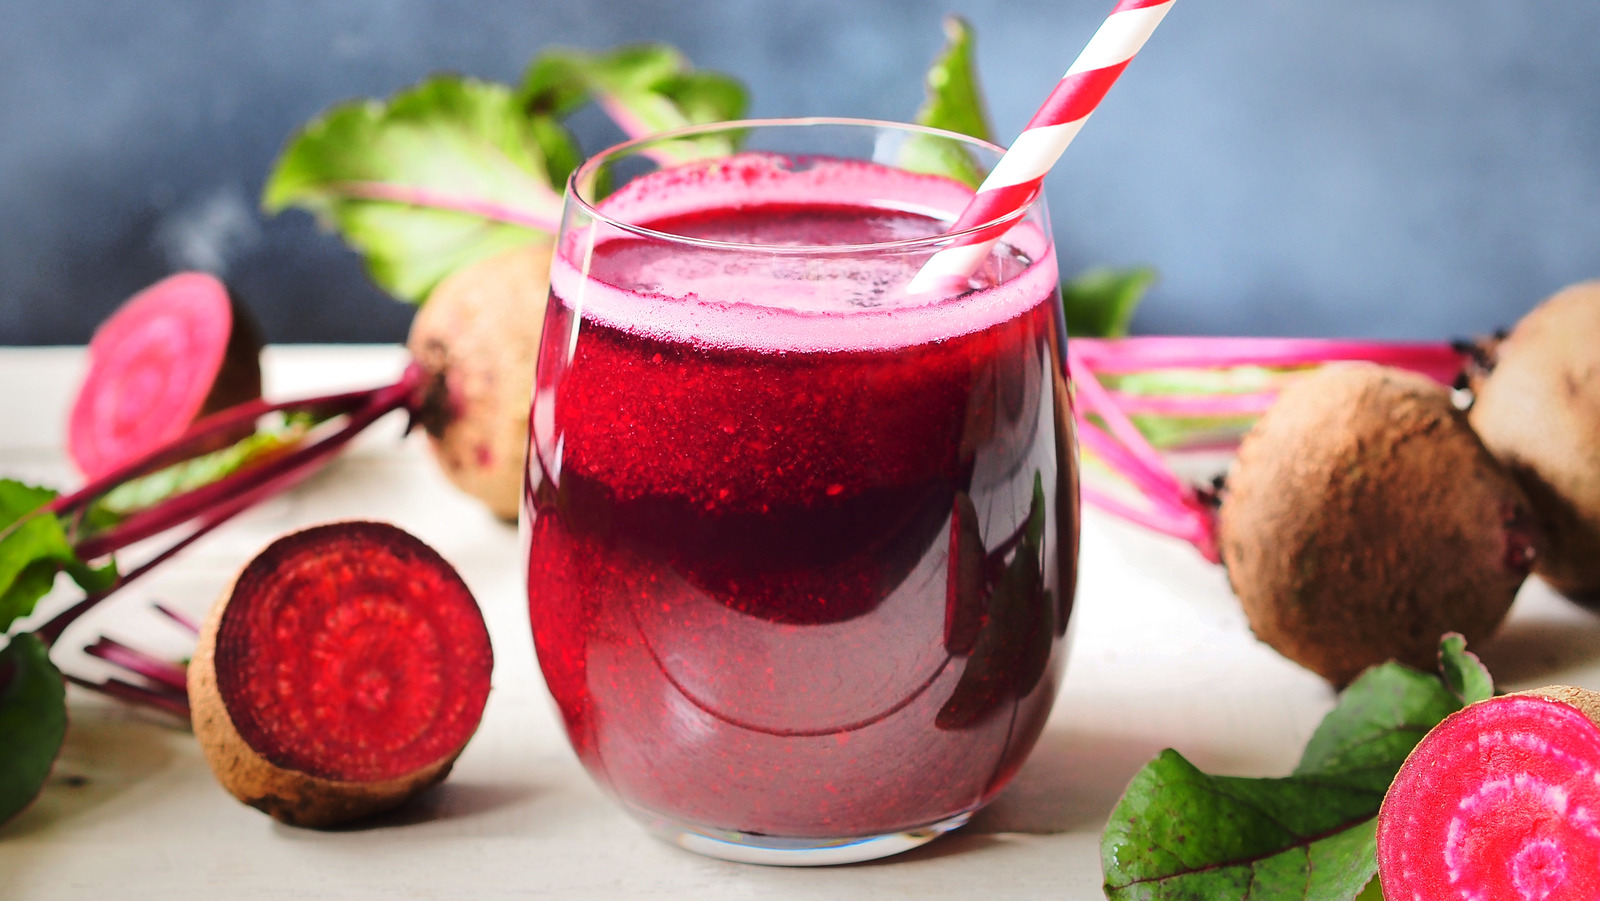 What Really Happens When You Dye Your Hair With Beet Juice